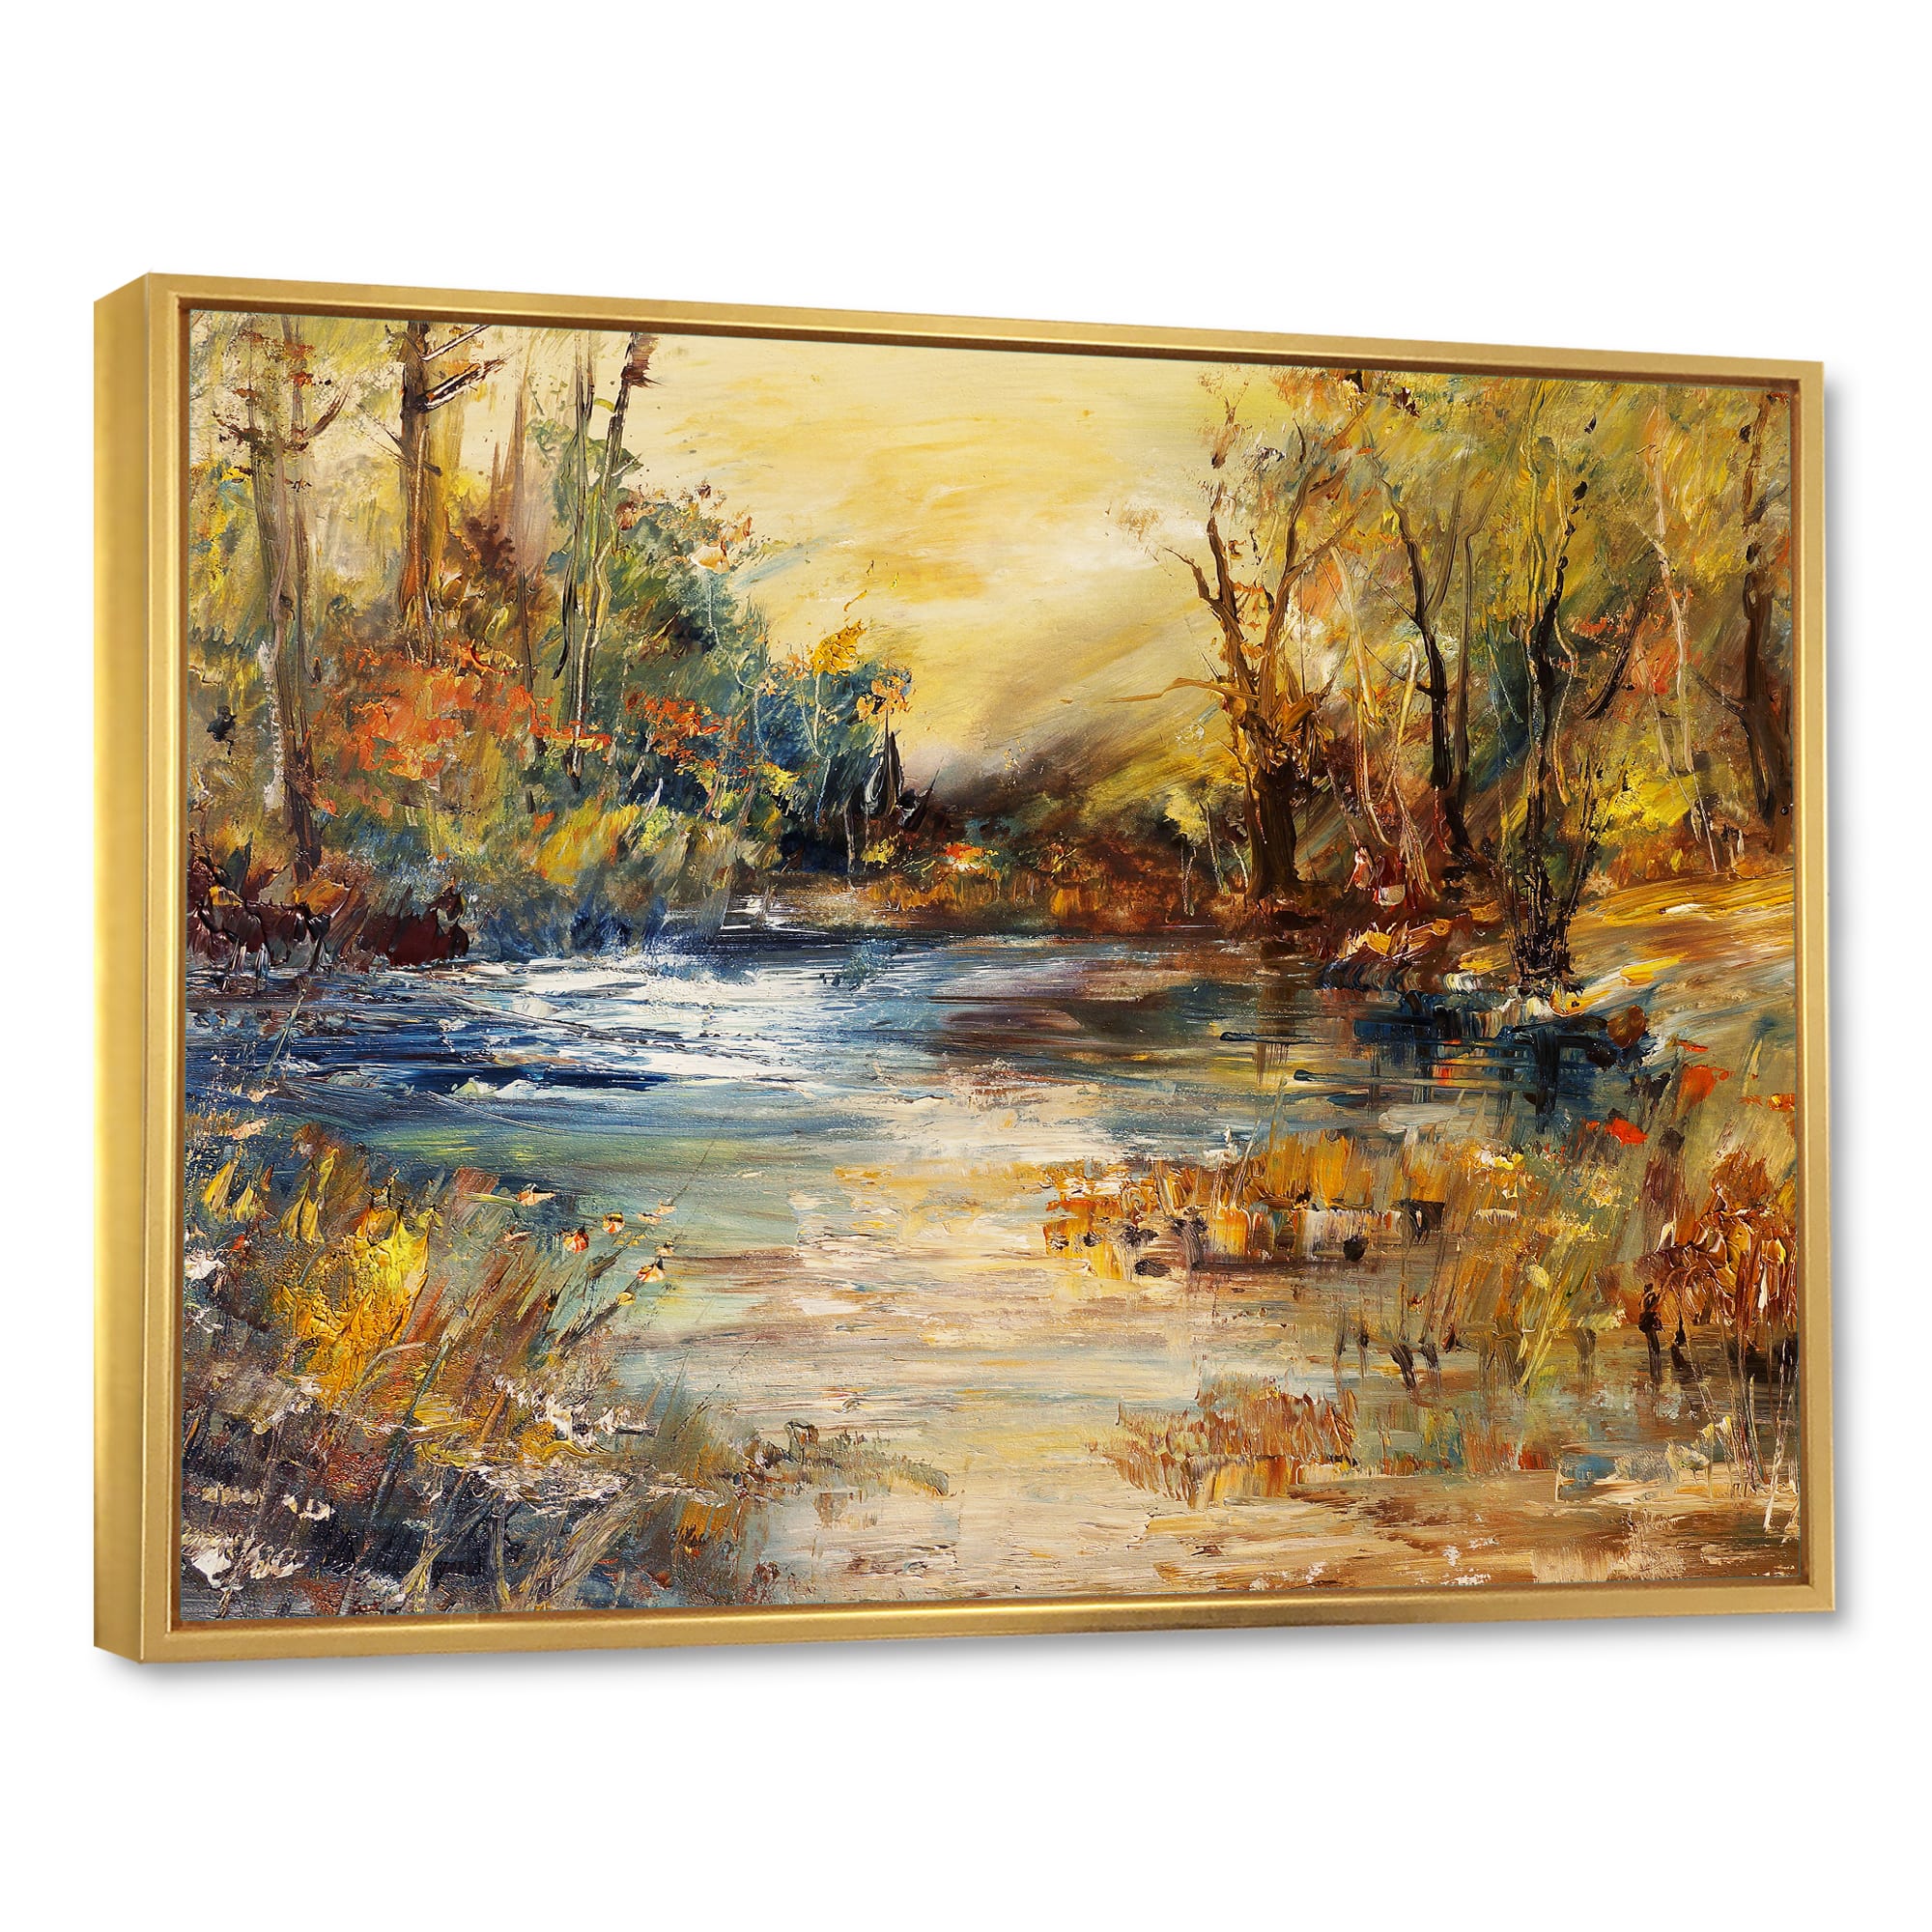 Designart - Stream in Forest Oil Painting - Landscape Painting Framed Canvas Print